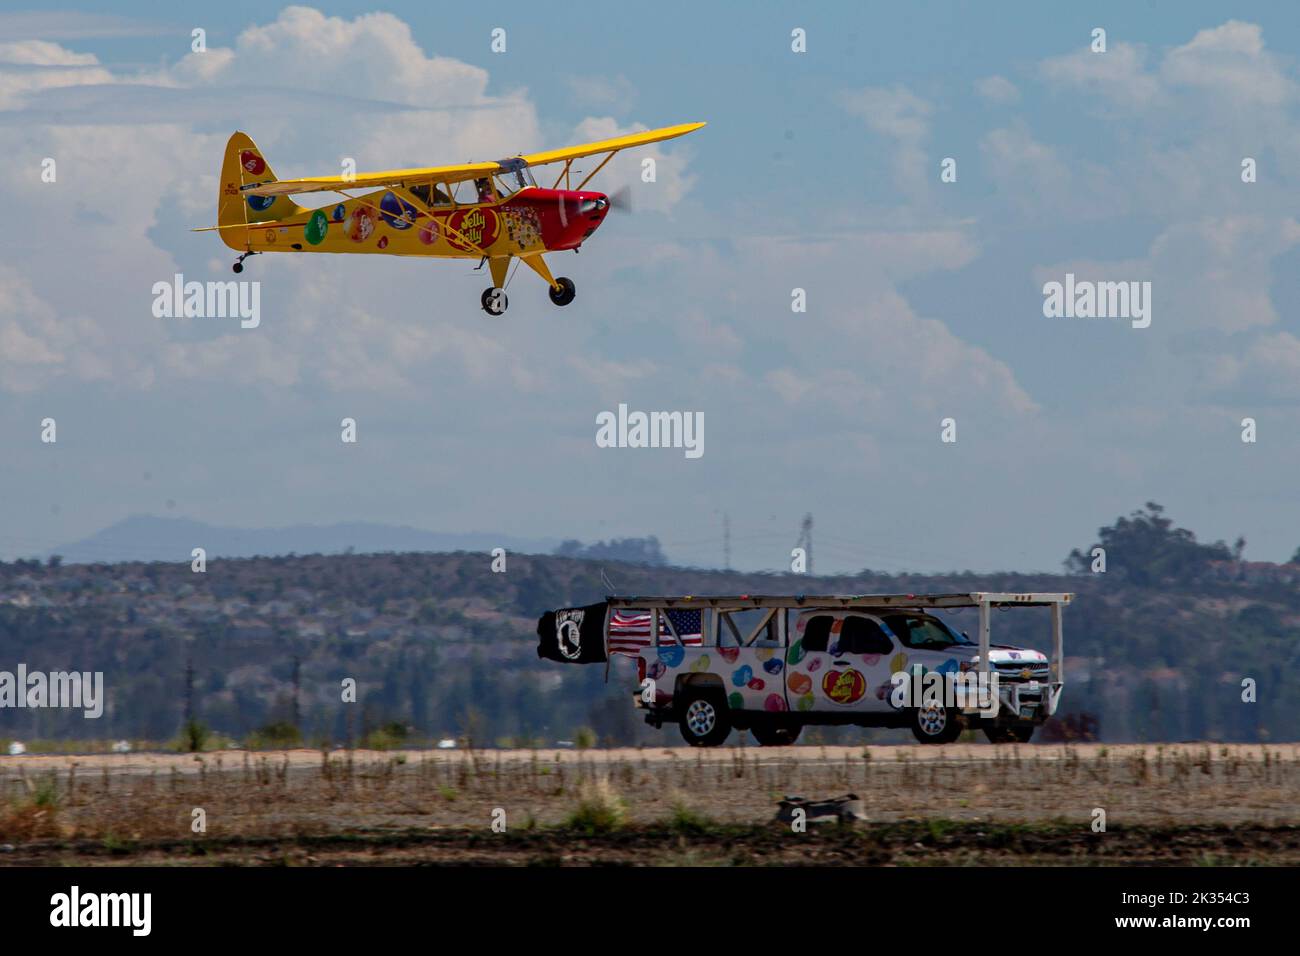 Kent Pietsch, piloting his Interstate Cadet, performs aerobatics during the 2022 Marine Corps Air Station Miramar Air Show at MCAS Miramar, San Diego, California, Sept. 23, 2022. Since 1973, Pietsch has been performing for millions of people at more than 400 shows that have taken him to quality venues throughout the United States. The theme for the 2022 MCAS Miramar Air Show, “Marines Fight, Evolve and Win,” reflects the Marine Corps’ ongoing modernization efforts to prepare for future conflicts. (U.S. Marine Corps photo by Lance Cpl. Zachary Larsen) Stock Photo